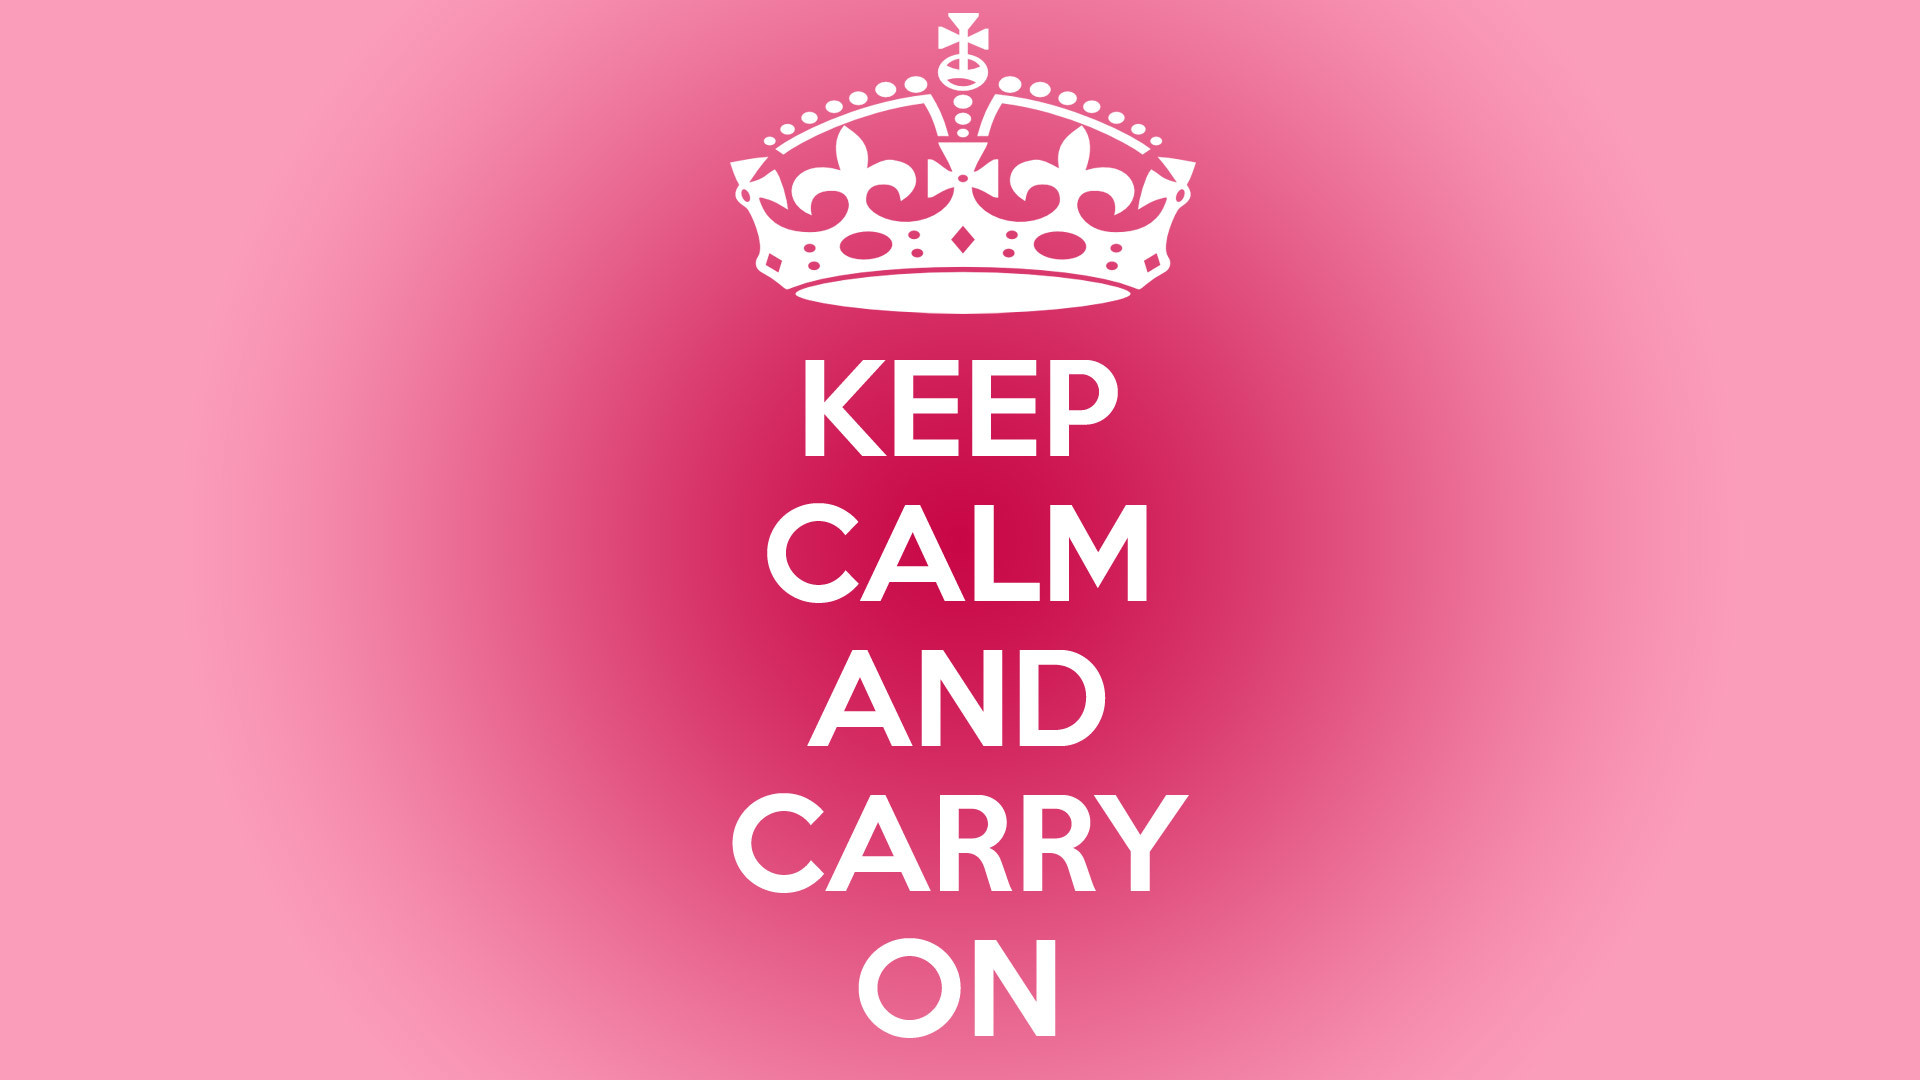 Keep Calm And Carry On Wallpaper : Keep calm and carry on quote keep calm  and